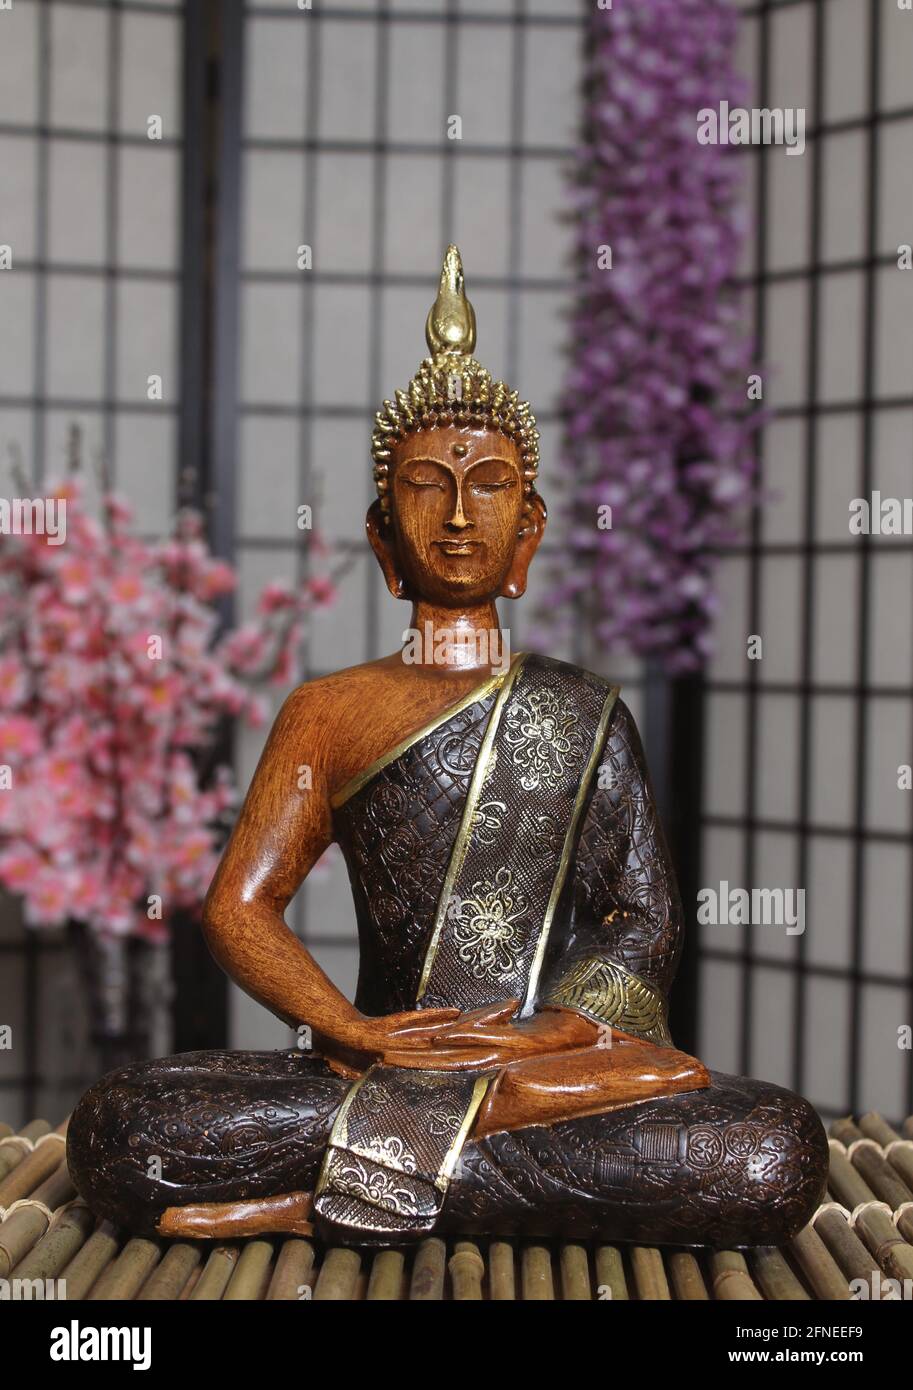 Buddha Statue in Asian Style Room With Cherry Blossoms in Background Indoors Stock Photo